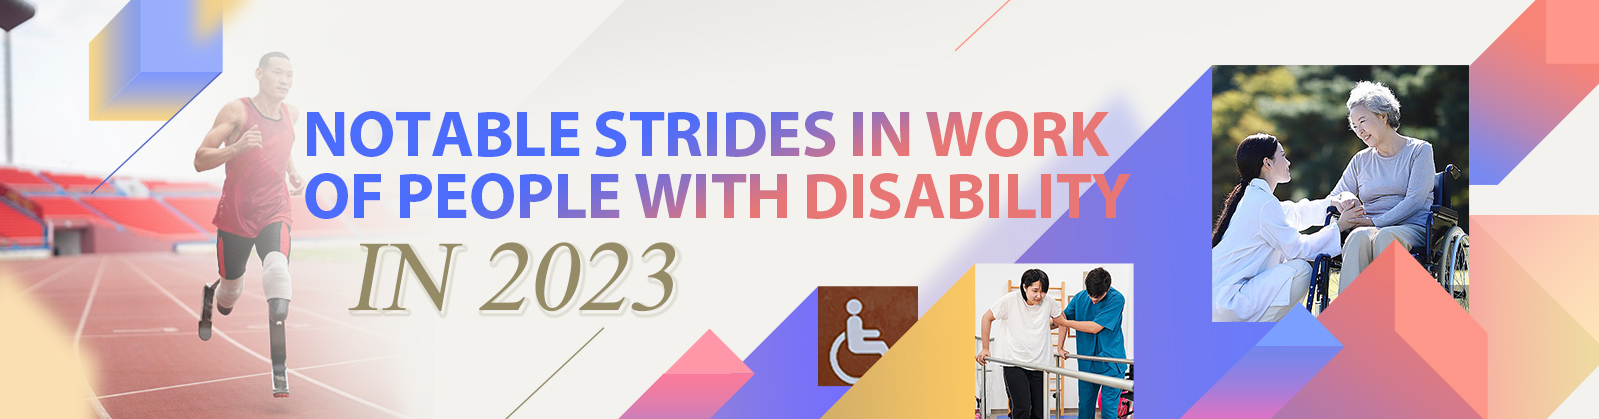 Notable Strides in Work of People with Disability in 2023